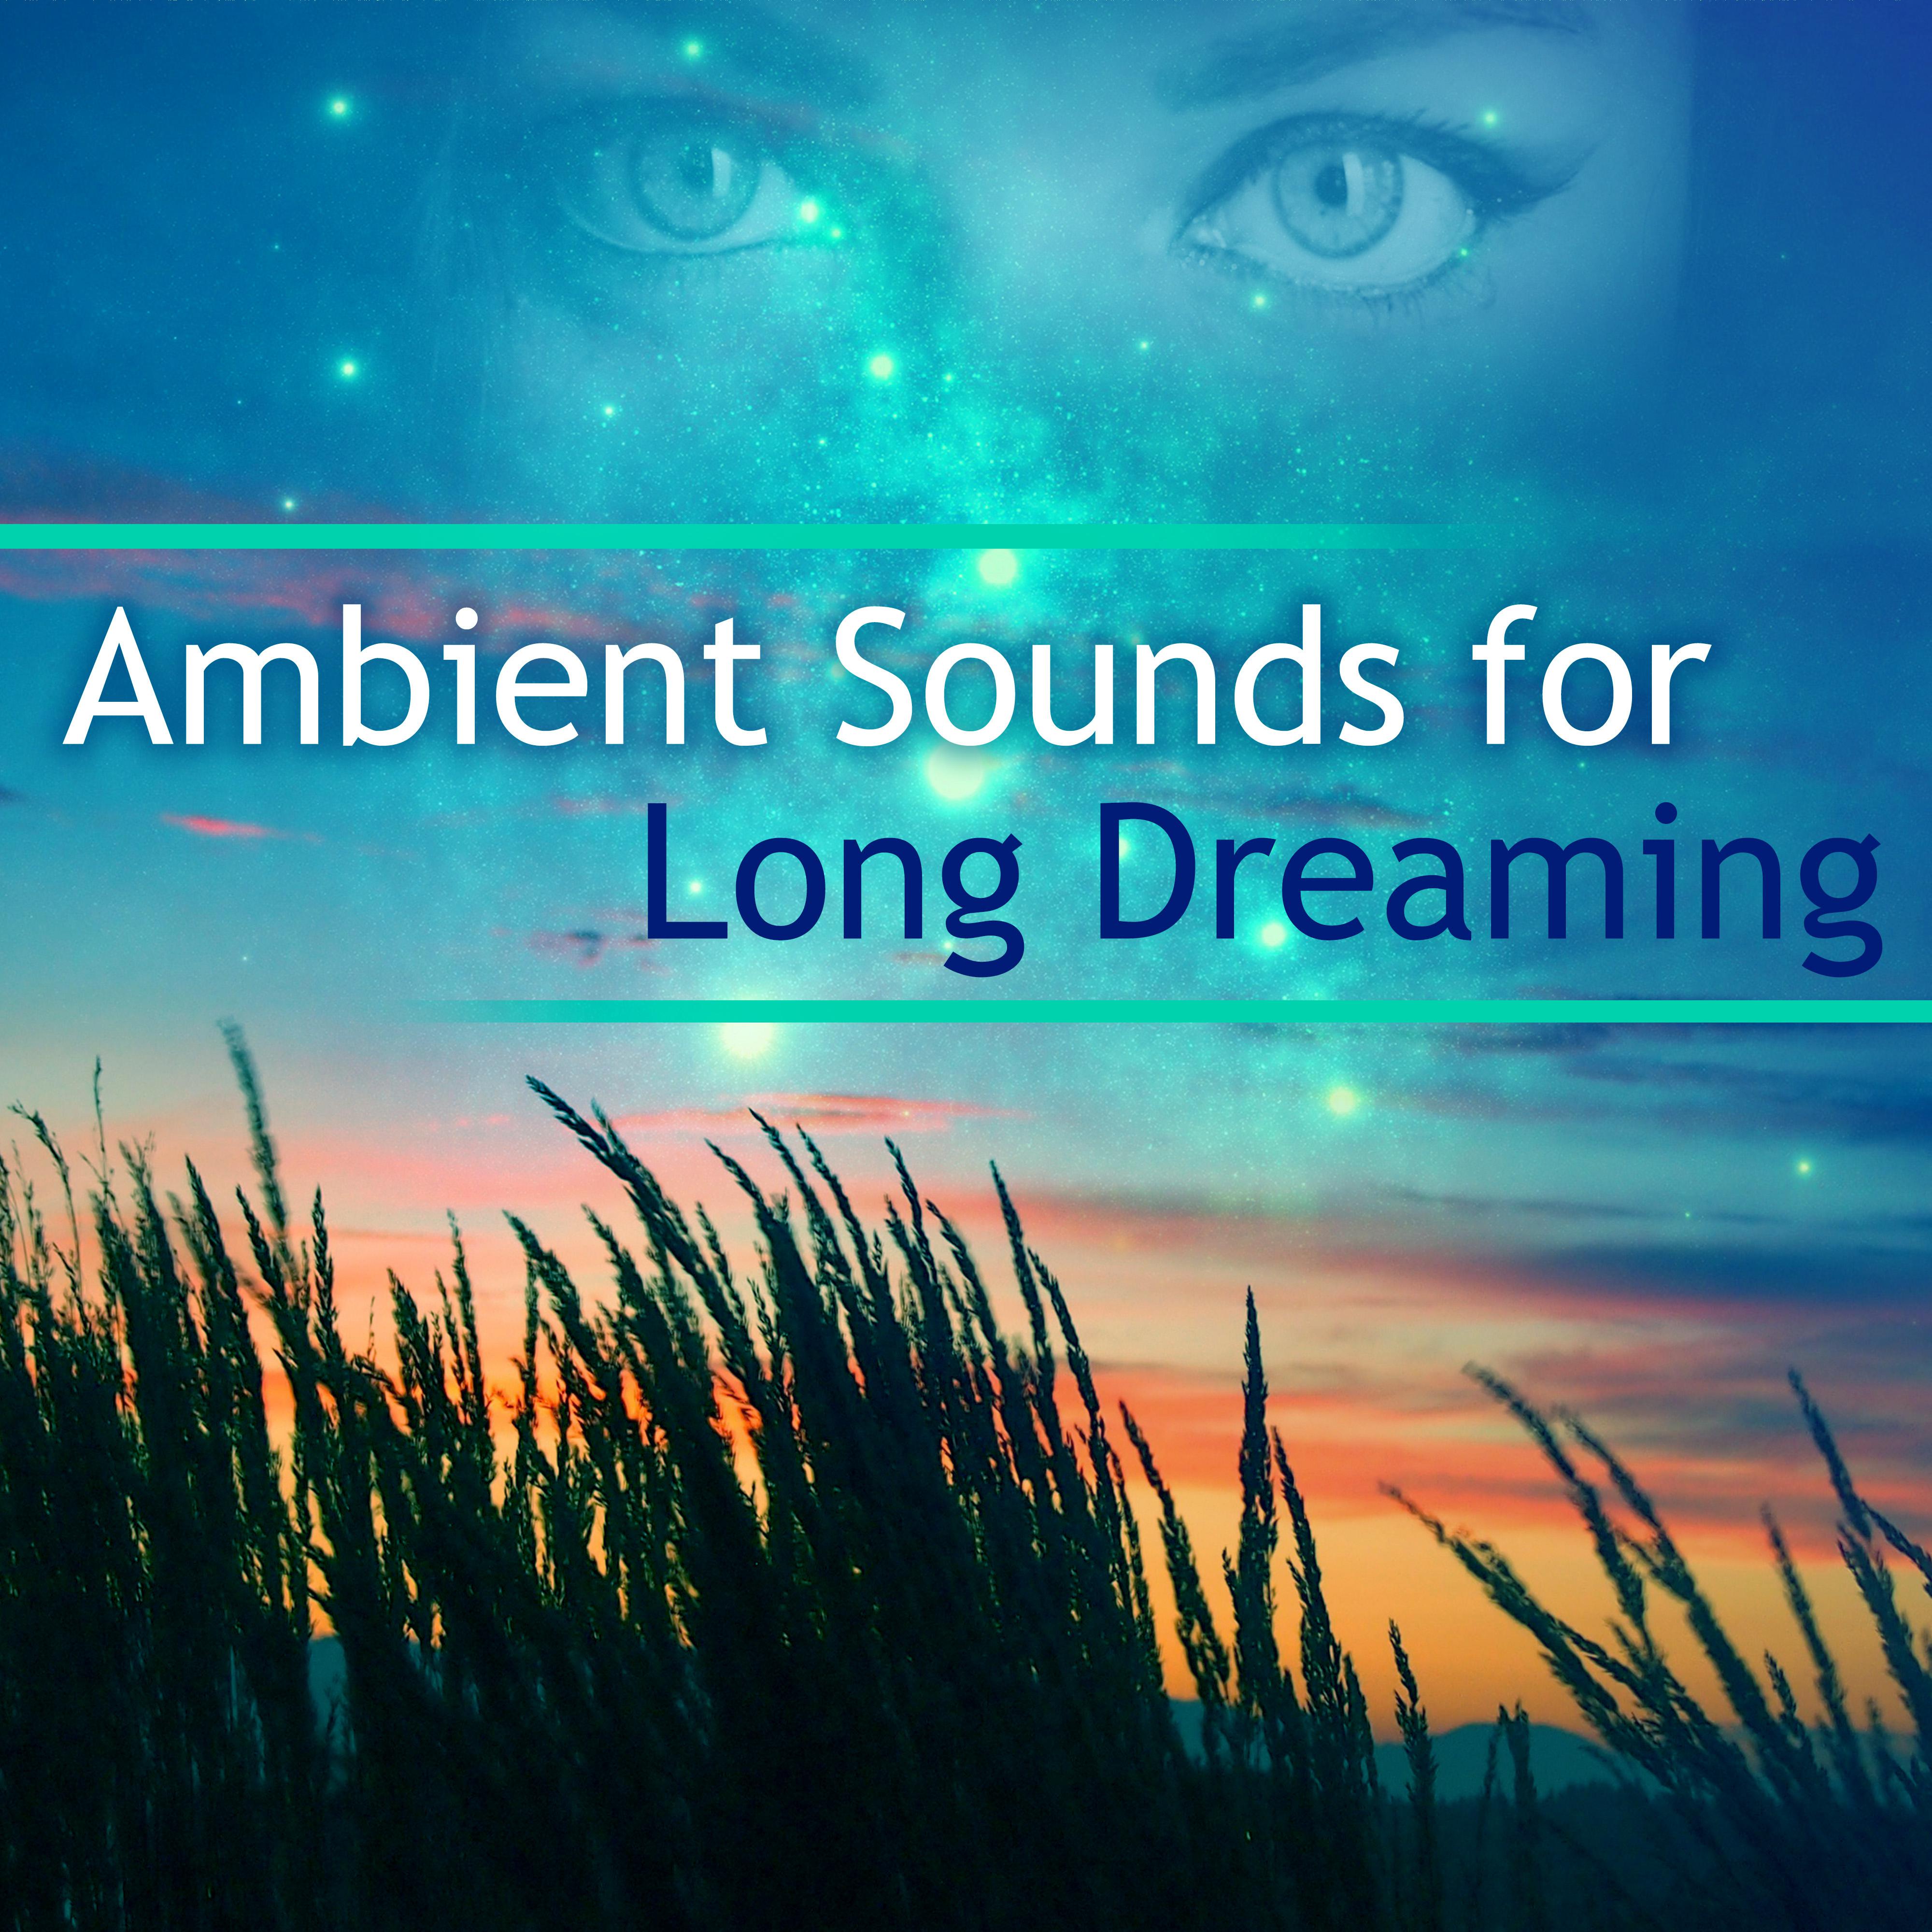 Deep Music nature. Calm Ambient. Ambient Sounds. Just Sleep just Dream. A long dream